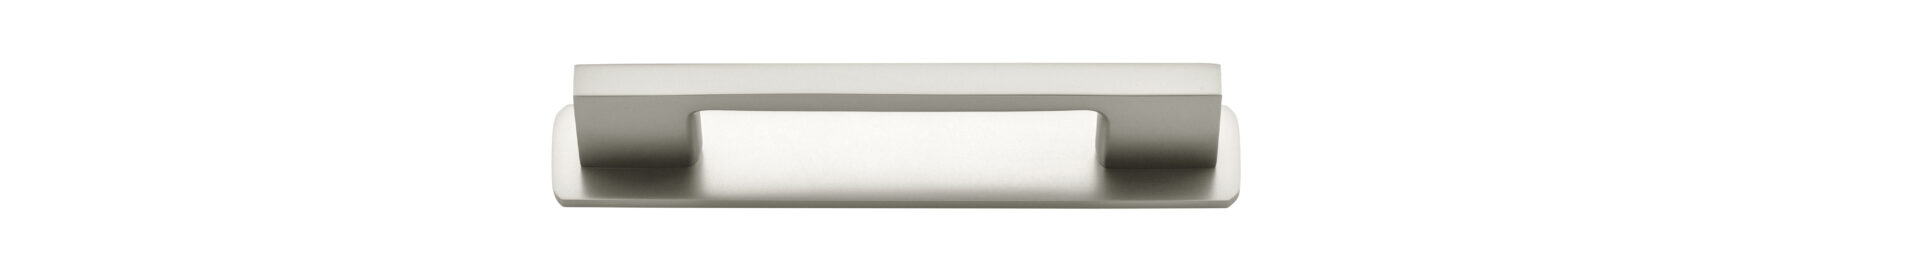 0550B - Cali Cabinet Pull with Backplate - CTC 96mm - Satin Nickel